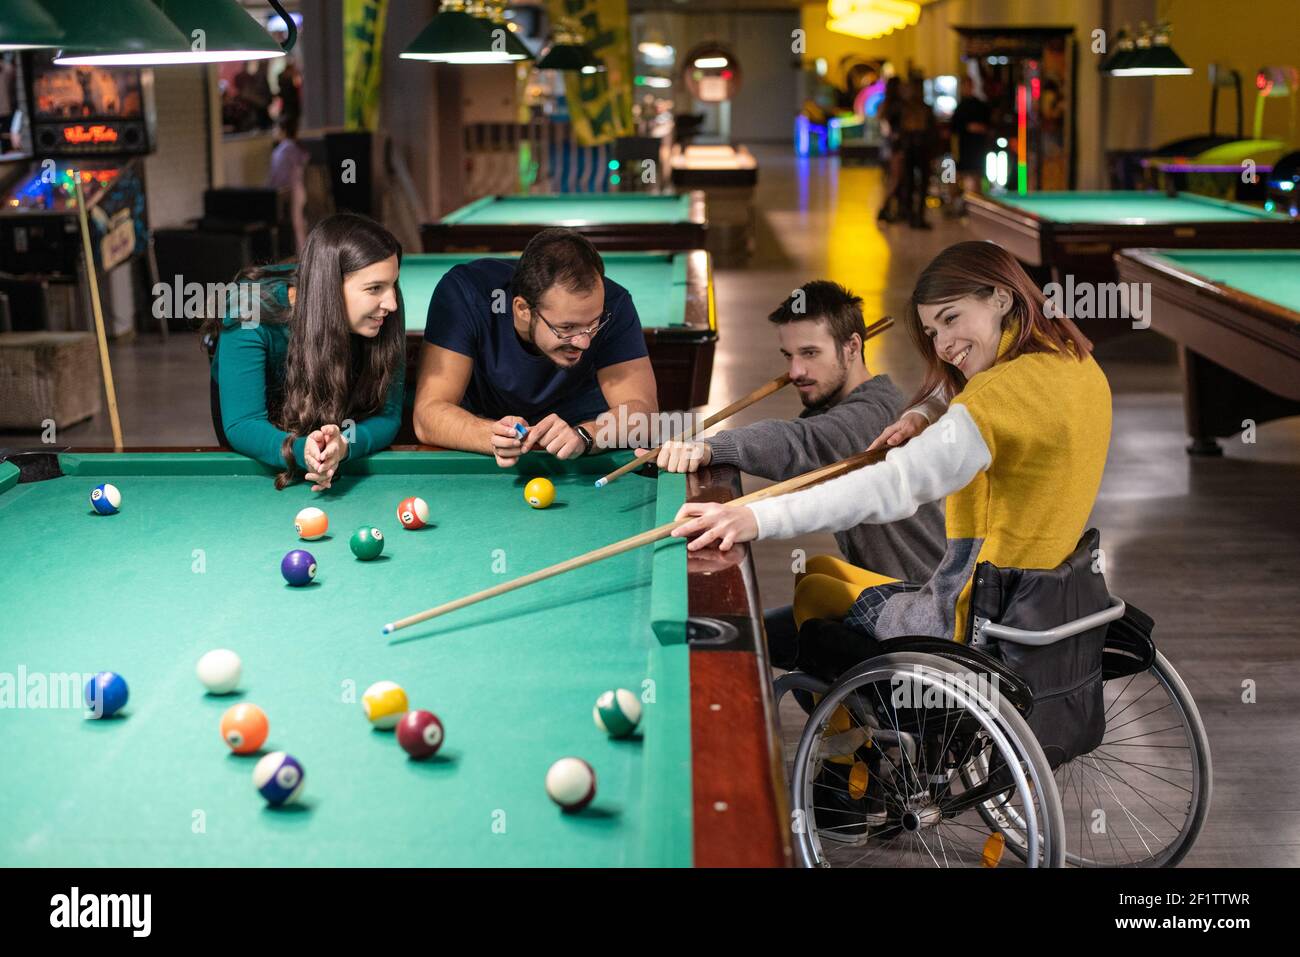 Disabled girl in a wheelchair playing billiards with friends Stock Photo